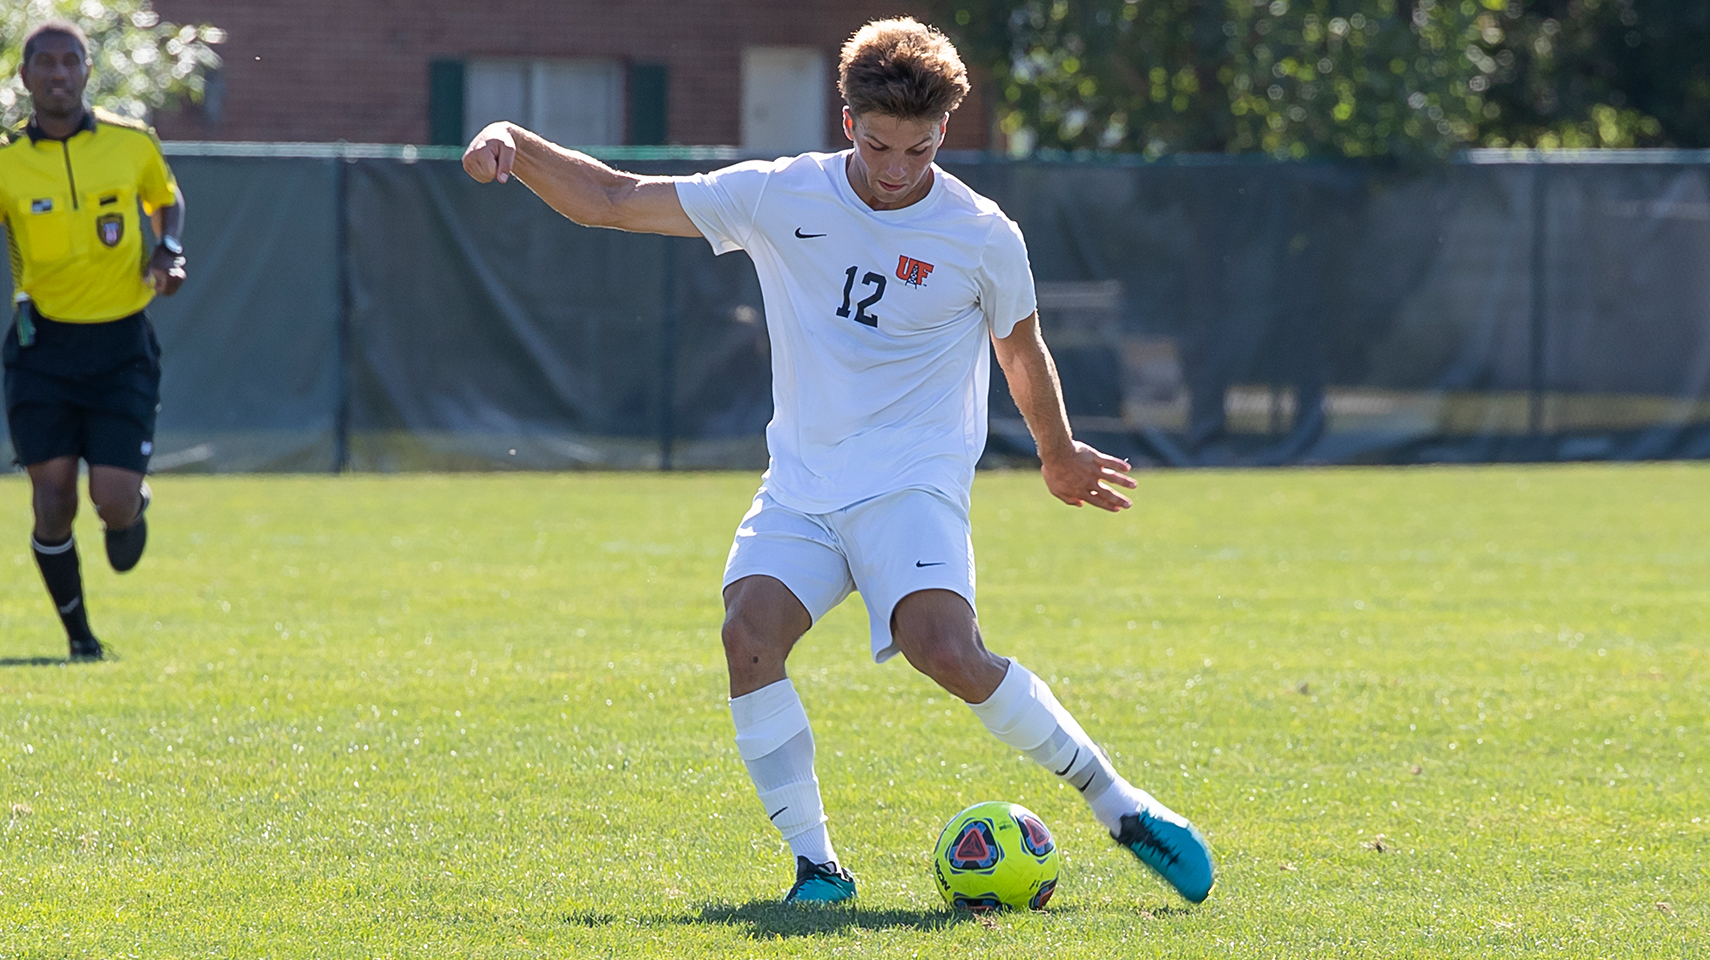 Men's soccer player in white kicking the ball with his left foot